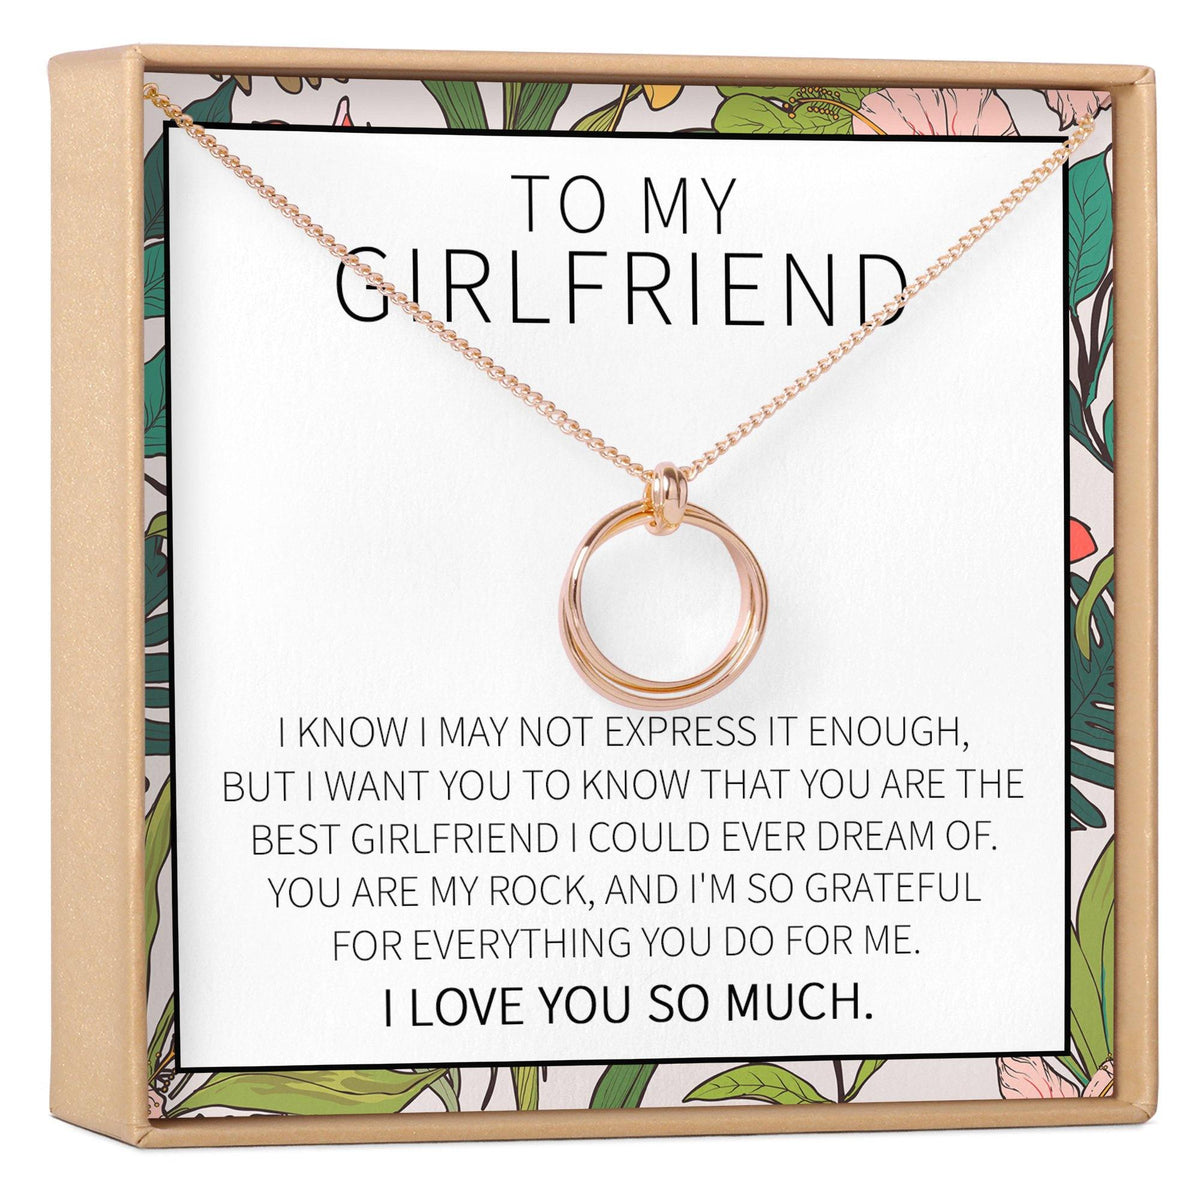 To My Boyfriend Necklace, Cute Gifts for Boyfriend, Gift for